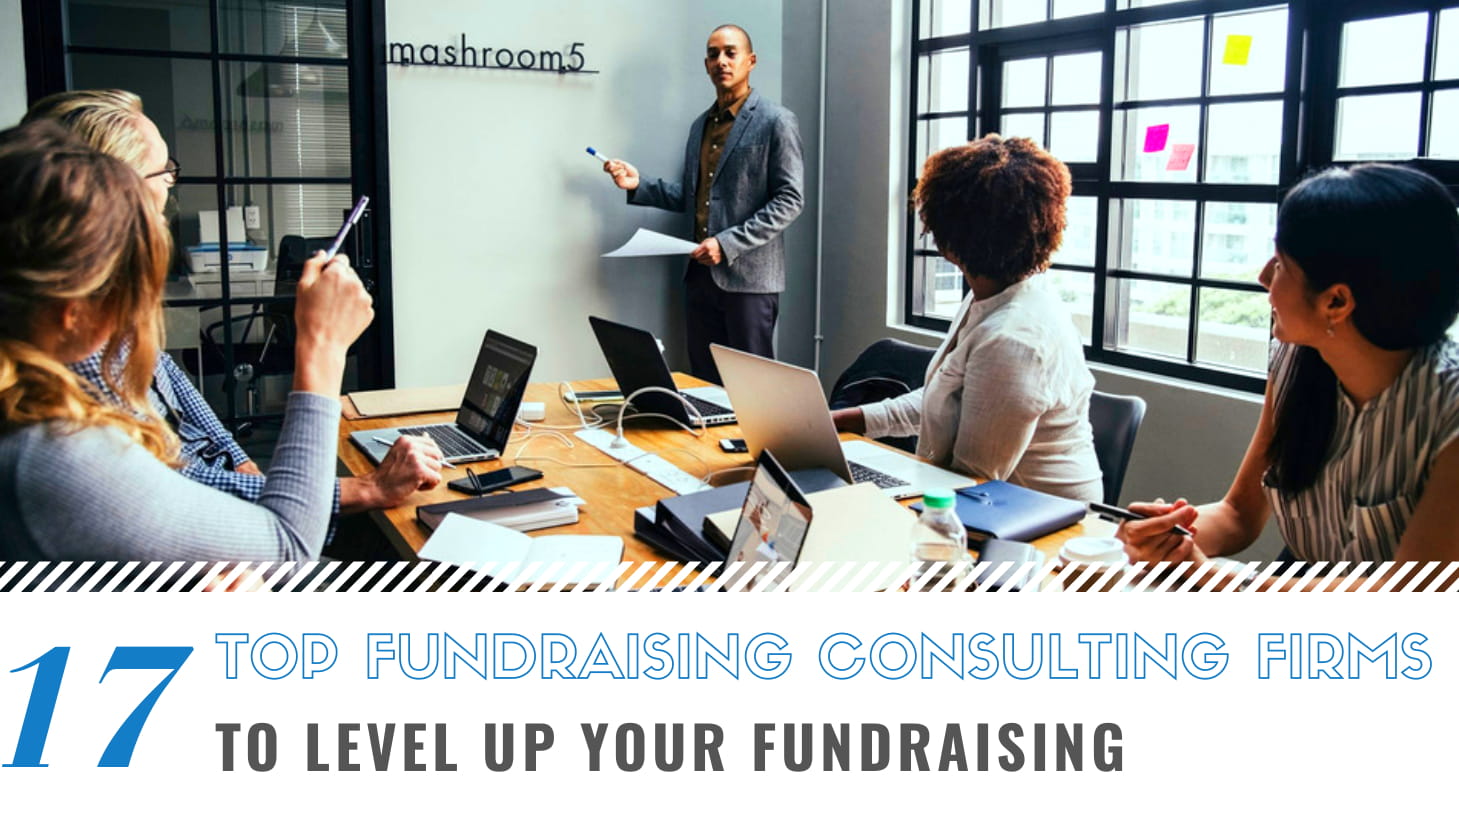 Top 17 Nonprofit Consulting Firms to Level Up Your Fundraising